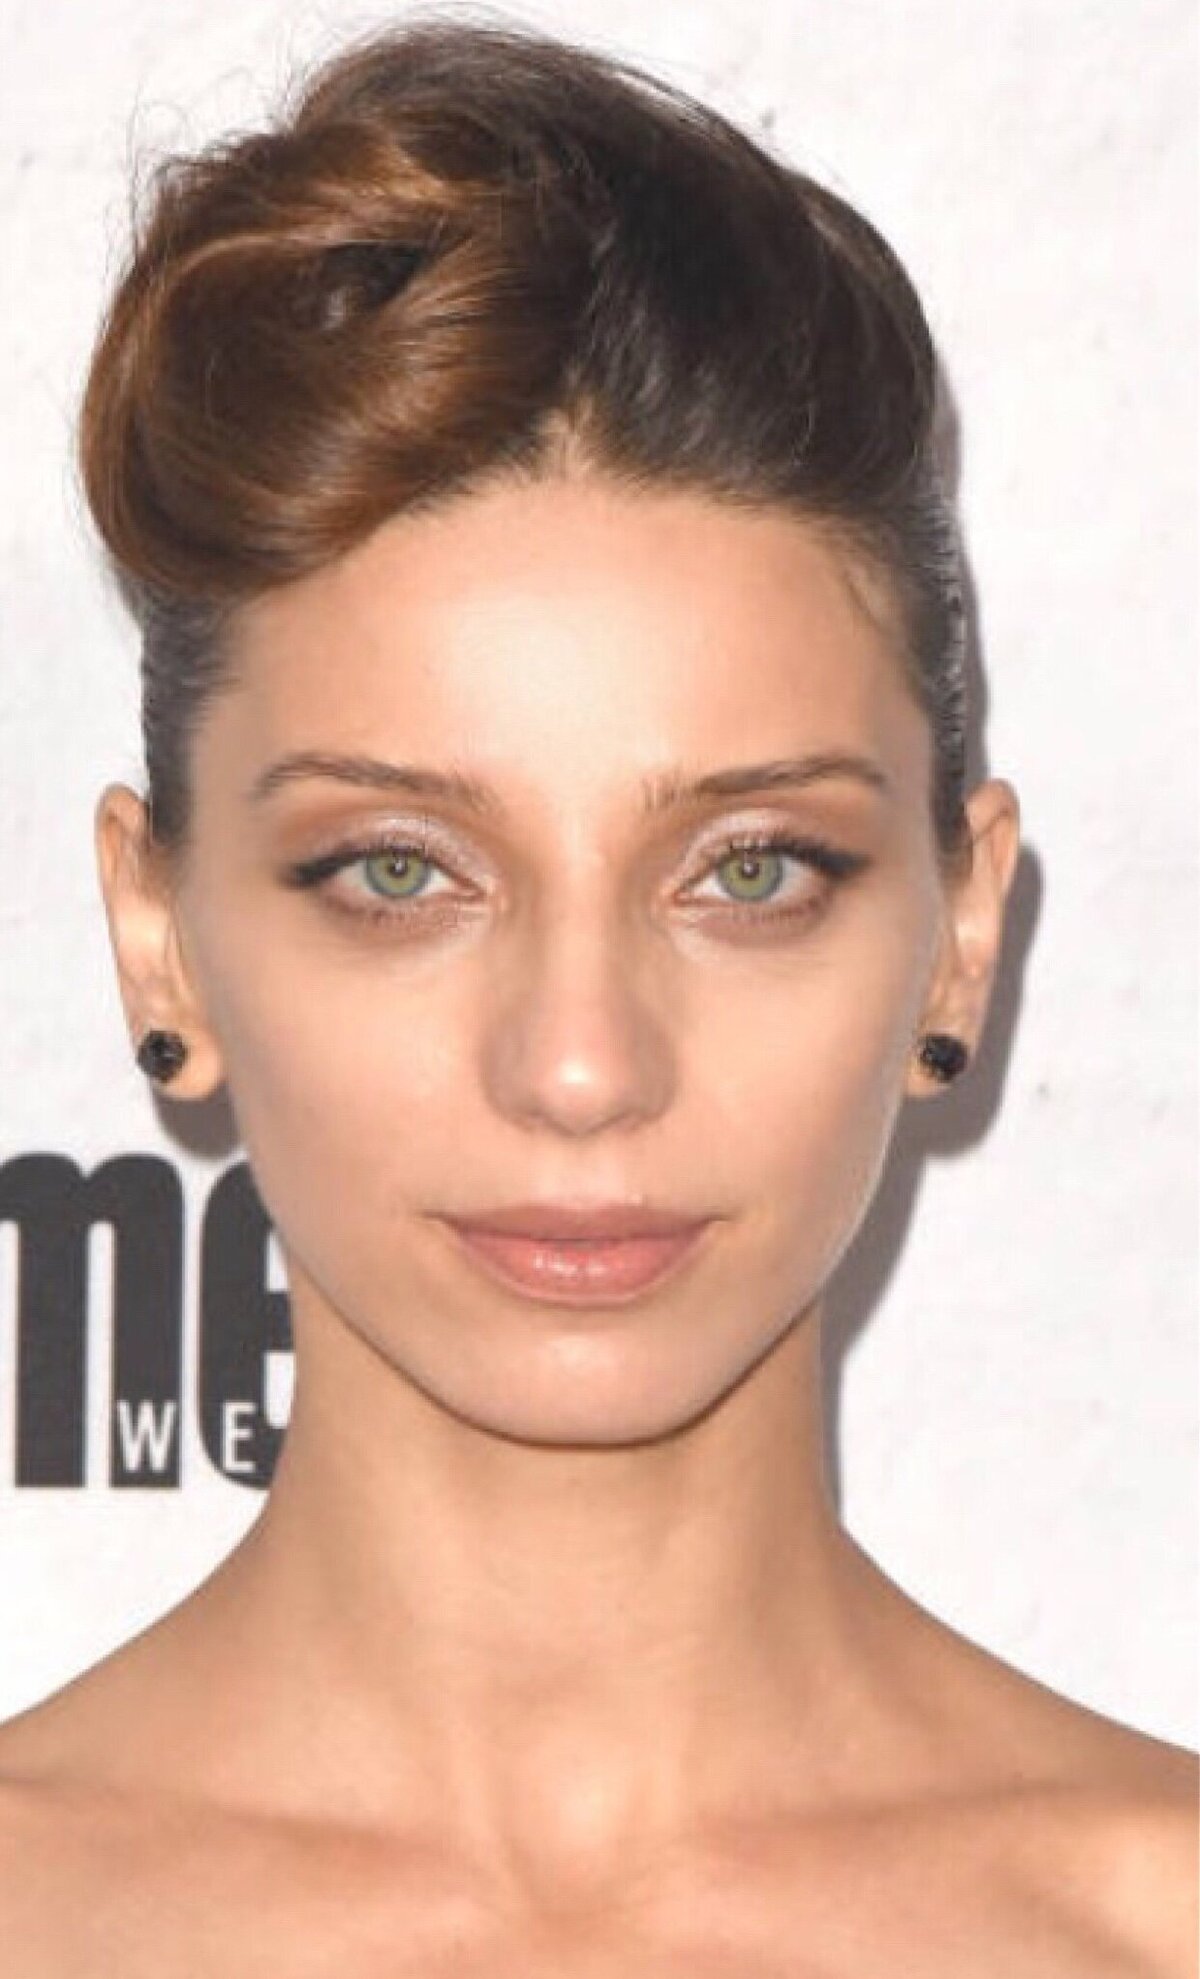 Angela Sarafyan wearing natural makeup , hair up and a black pant suit to the Entertainment Weekly party